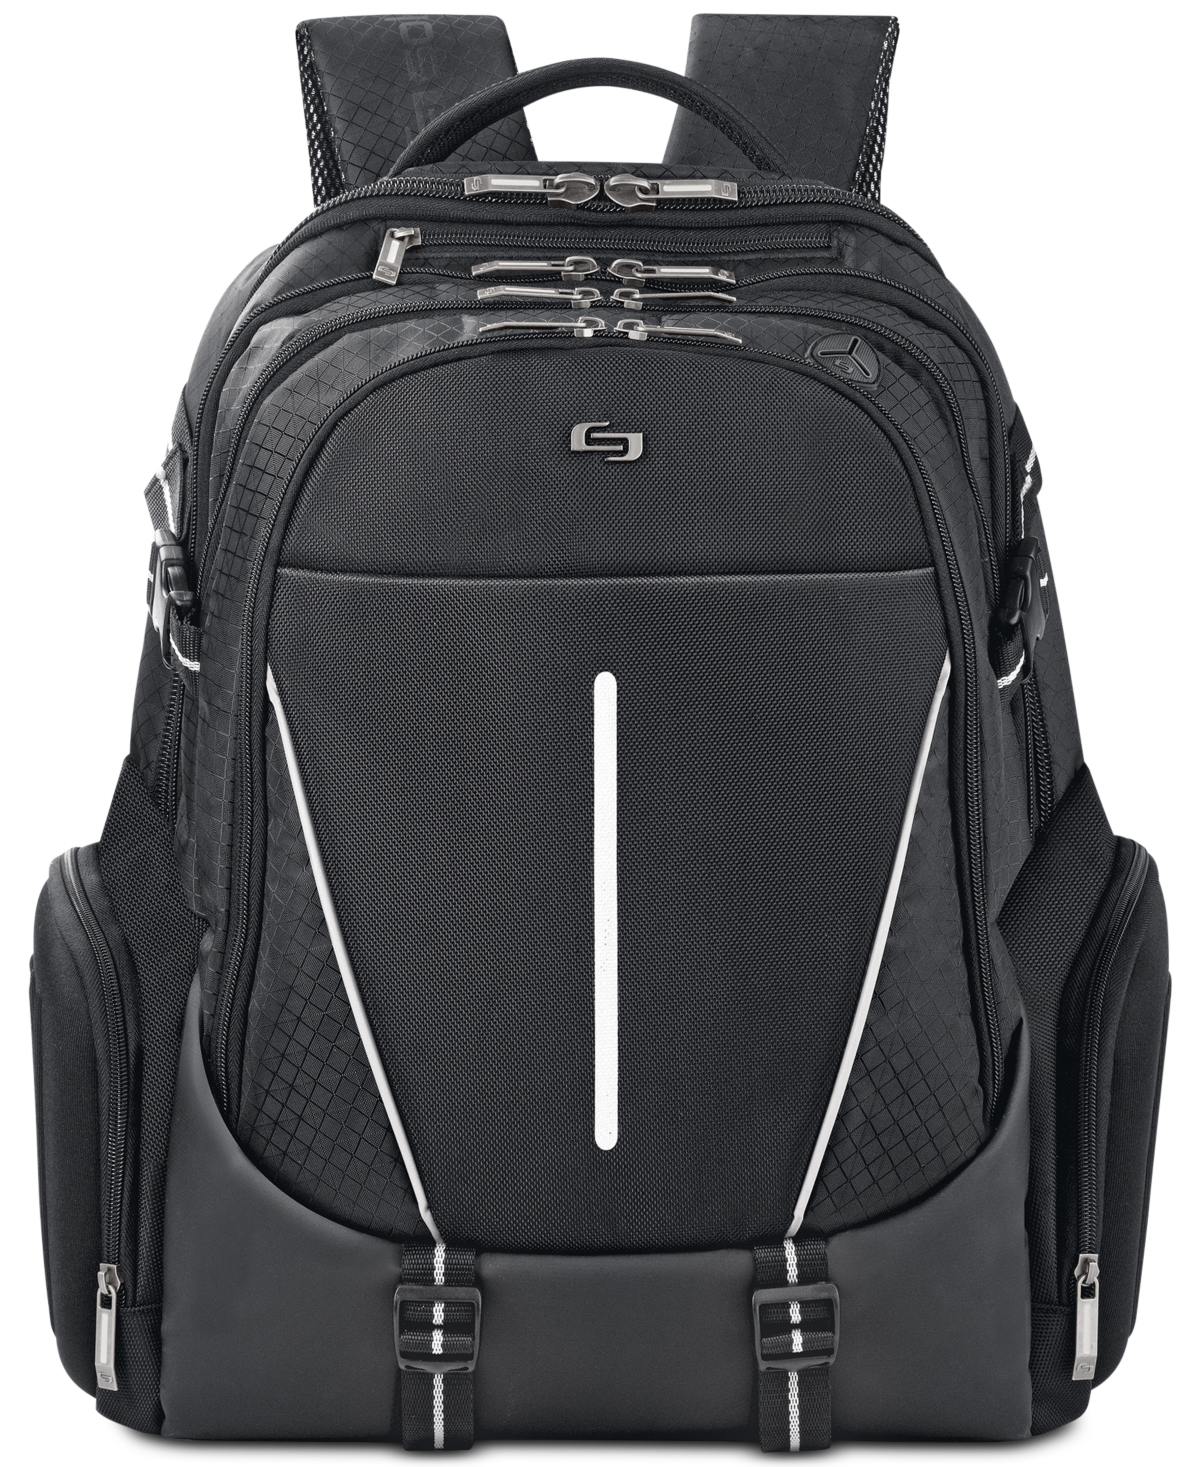 New York Active 17.3" Laptop Backpack - Black With Gray Accents